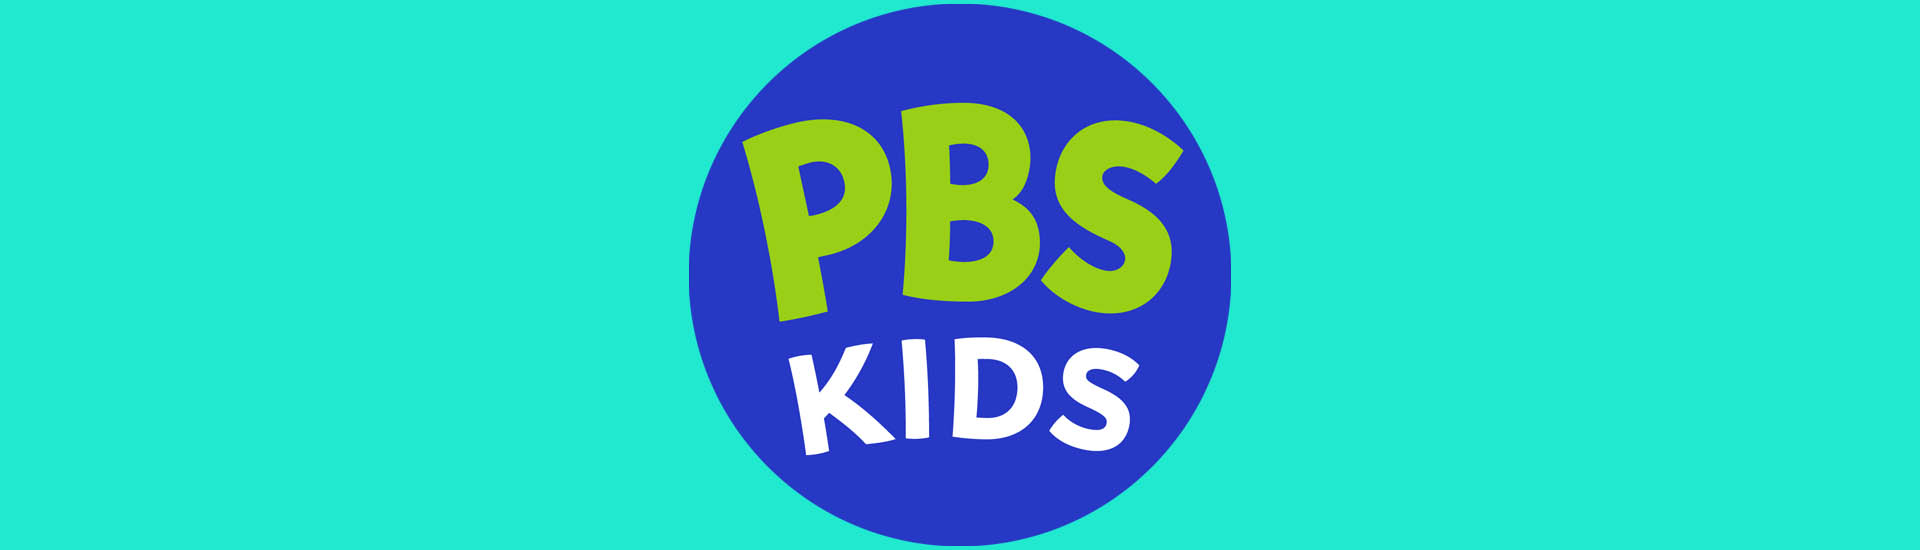 Image for PBS KIDS